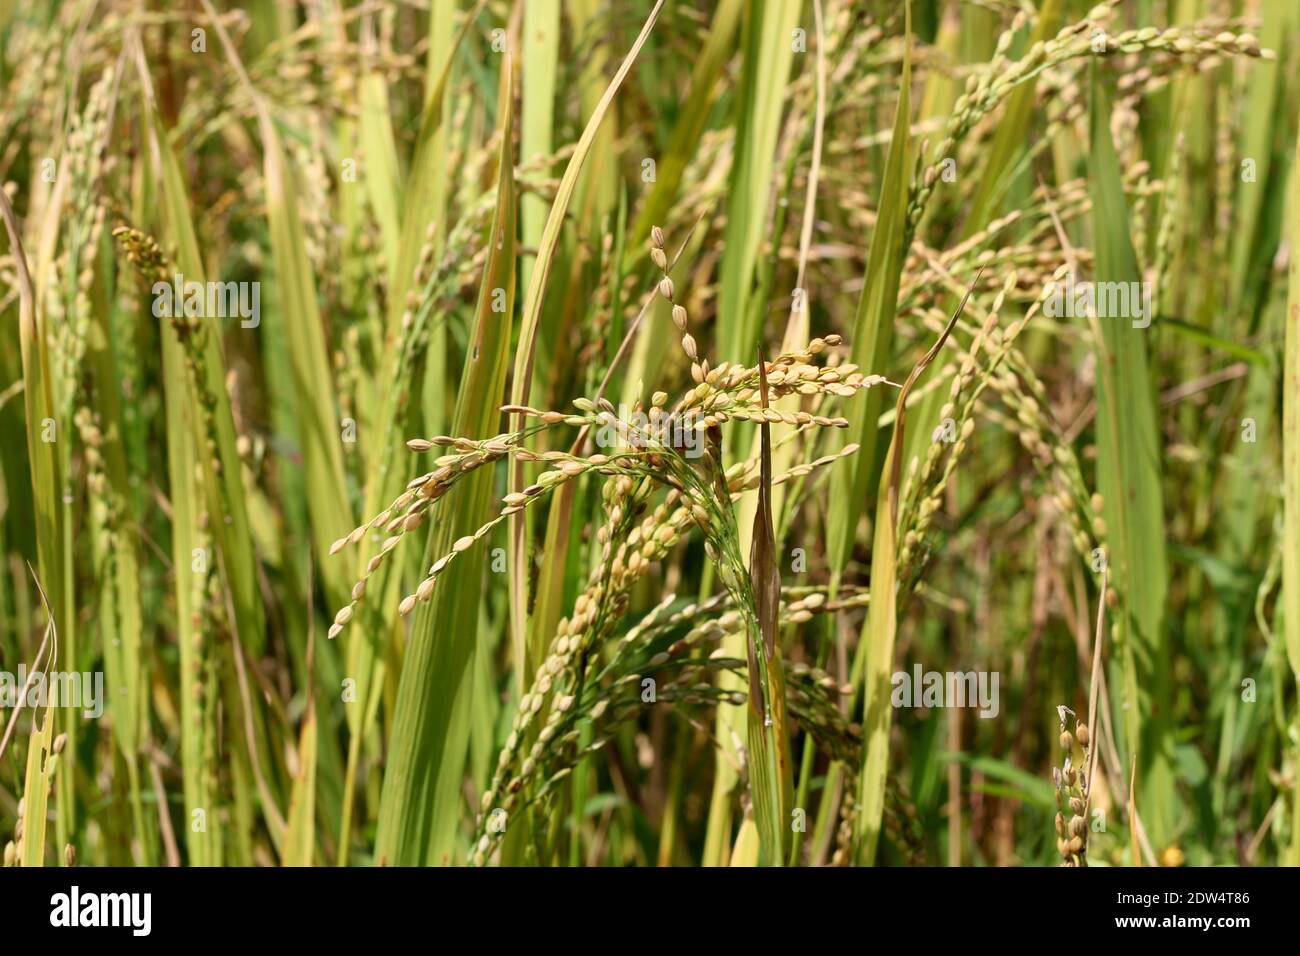 Two ripen paddy spikes bend towards each other Stock Photo